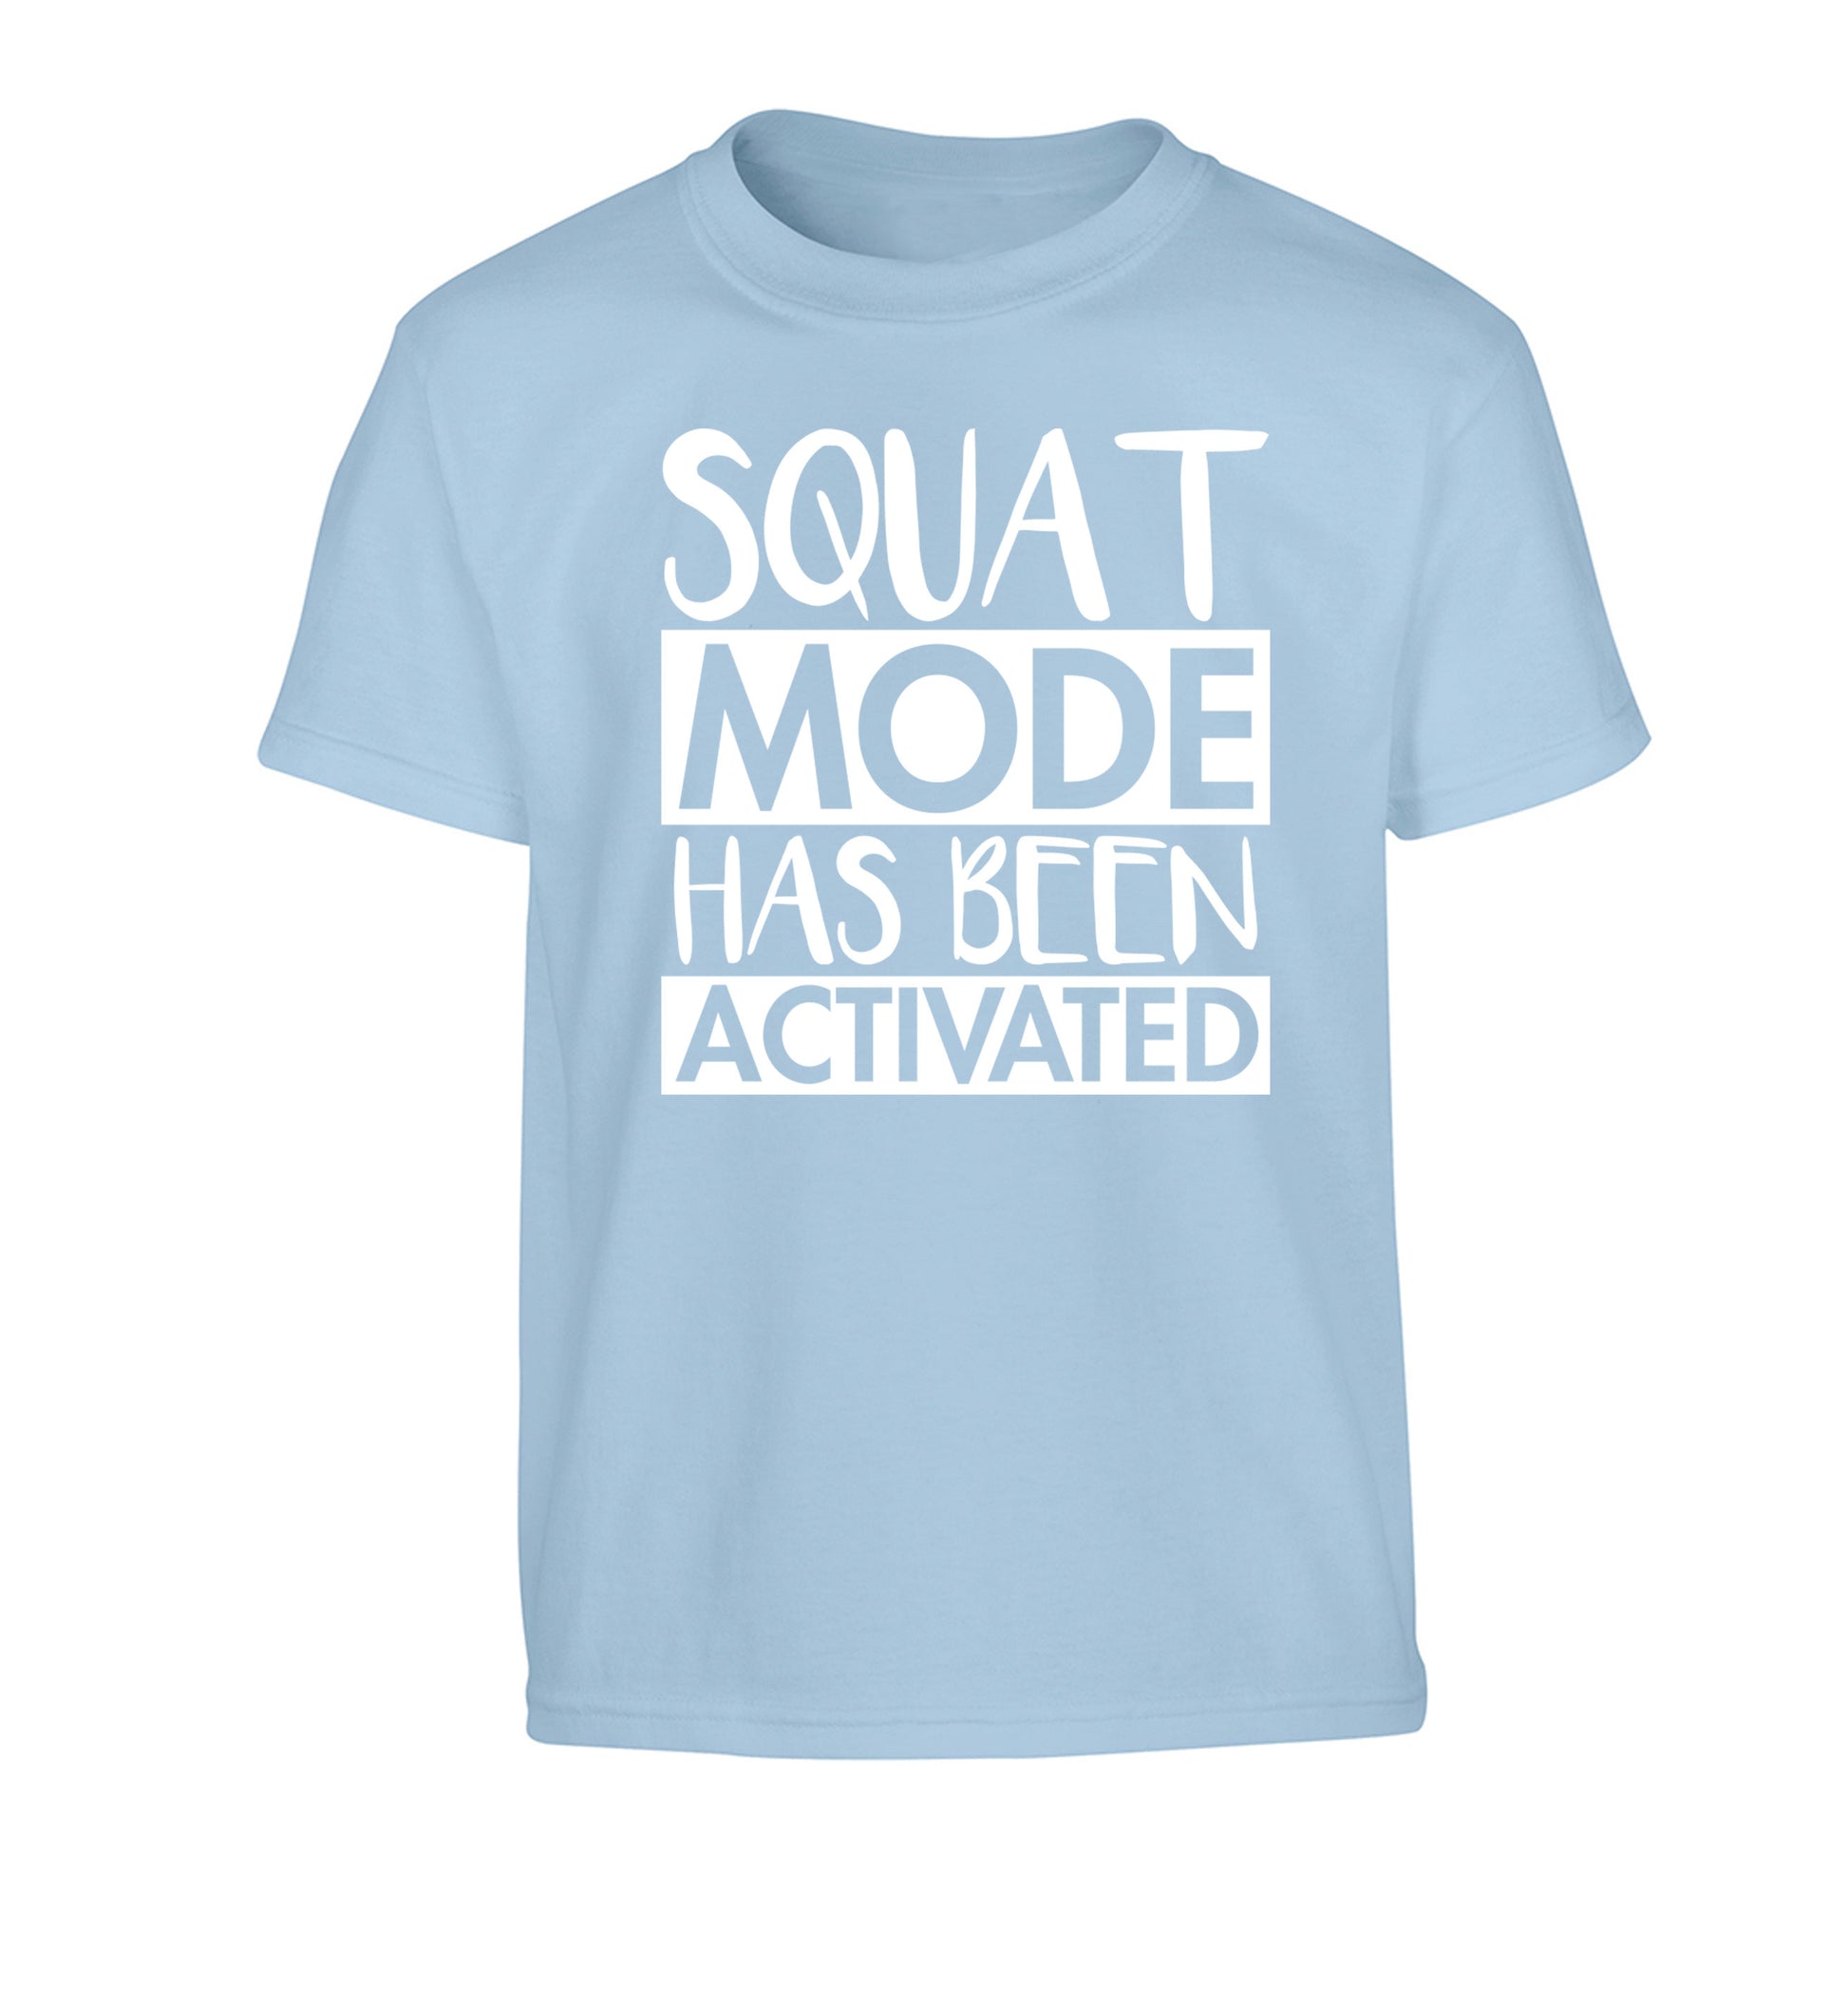 Squat mode activated Children's light blue Tshirt 12-14 Years